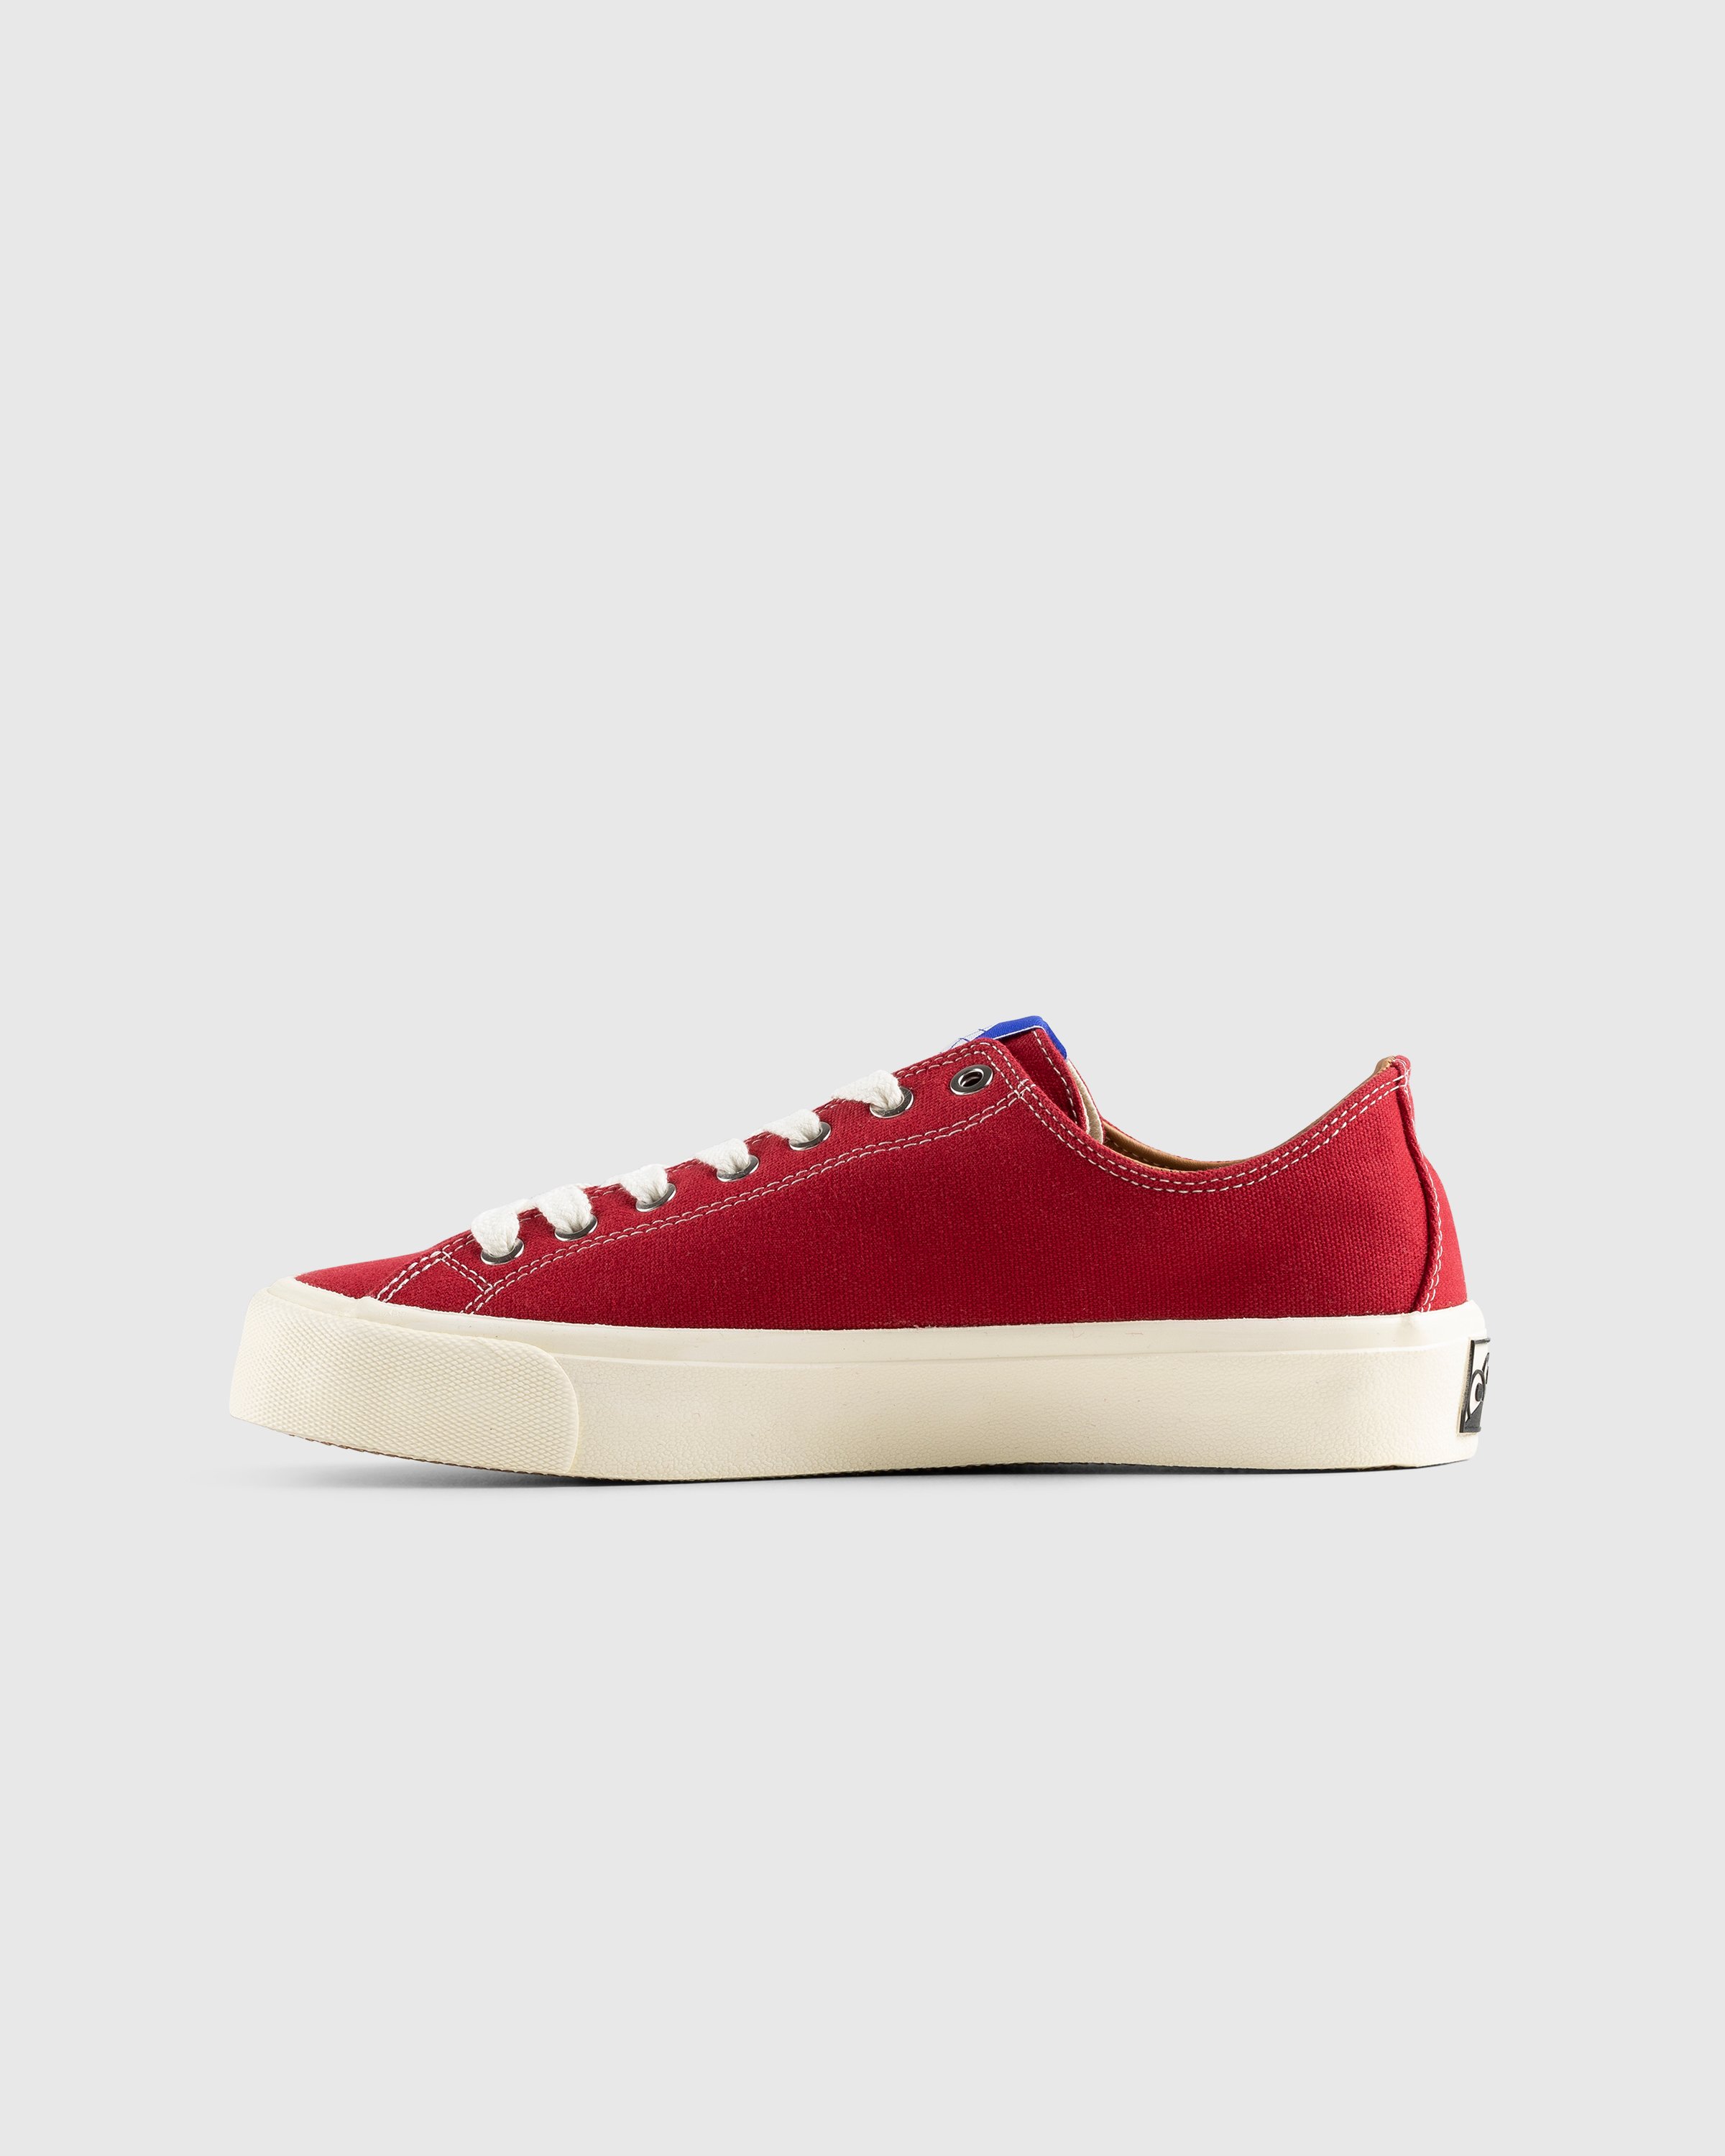 Last Resort AB - VM003-Canvas LO Classic Red/White - Footwear - Red - Image 2